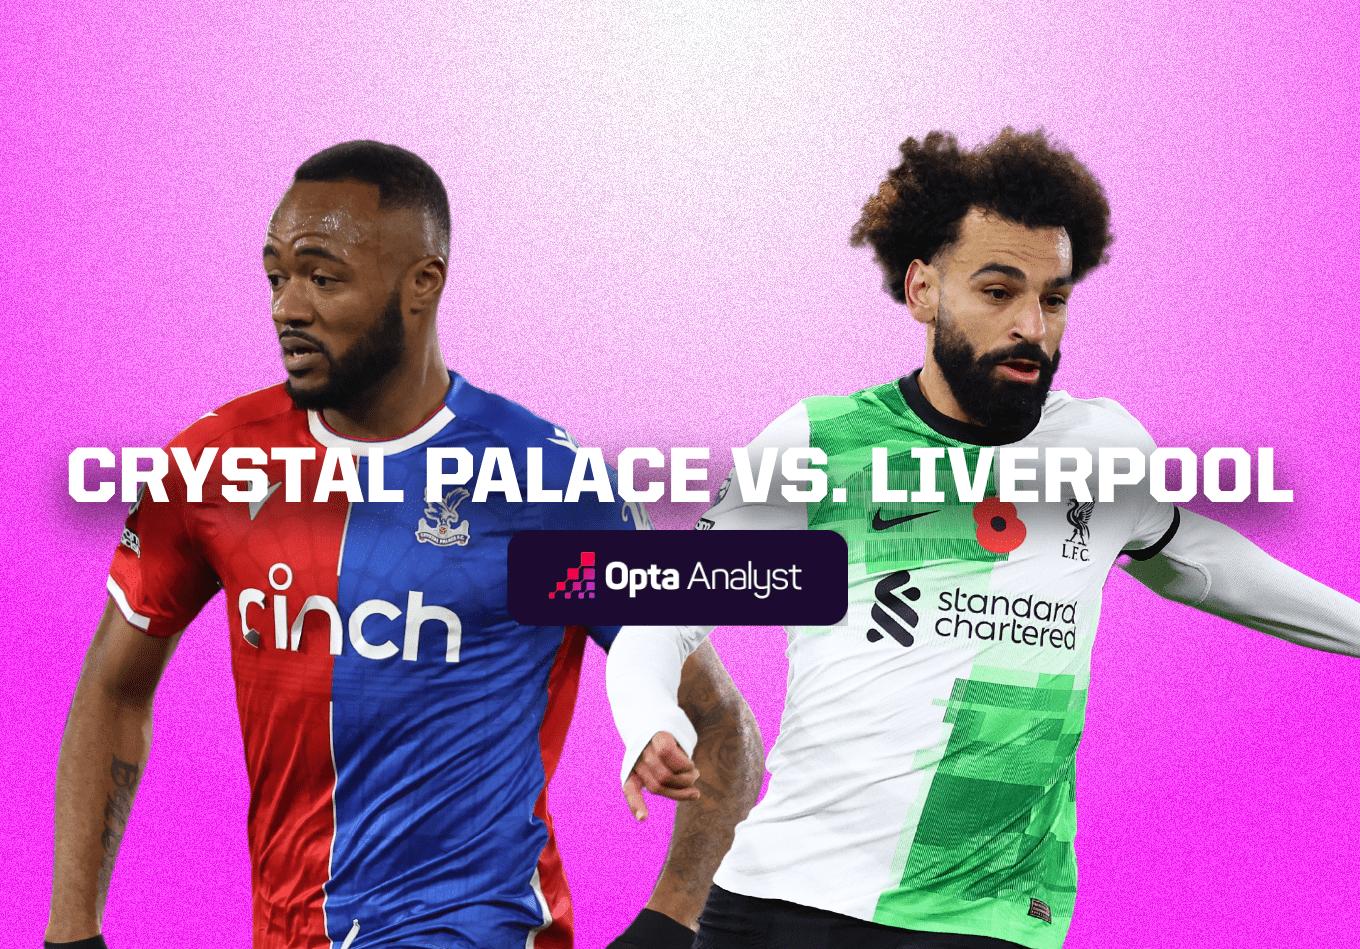 Crystal Palace vs Liverpool: Prediction and Preview